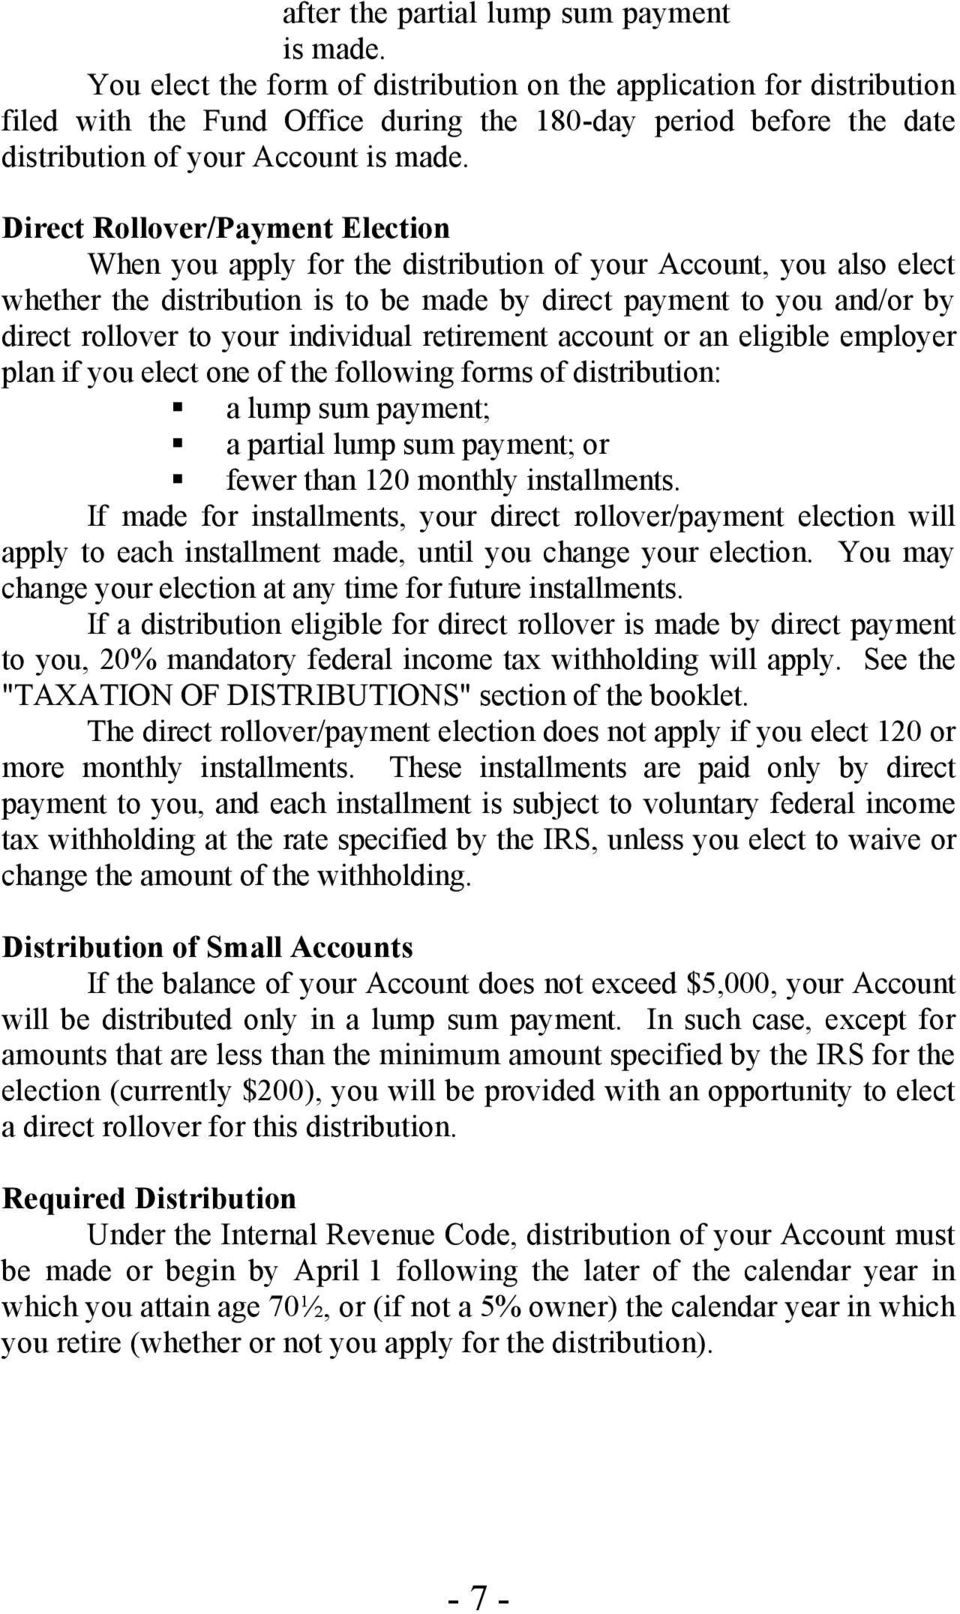 Direct Rollover/Payment Election When you apply for the distribution of your Account, you also elect whether the distribution is to be made by direct payment to you and/or by direct rollover to your